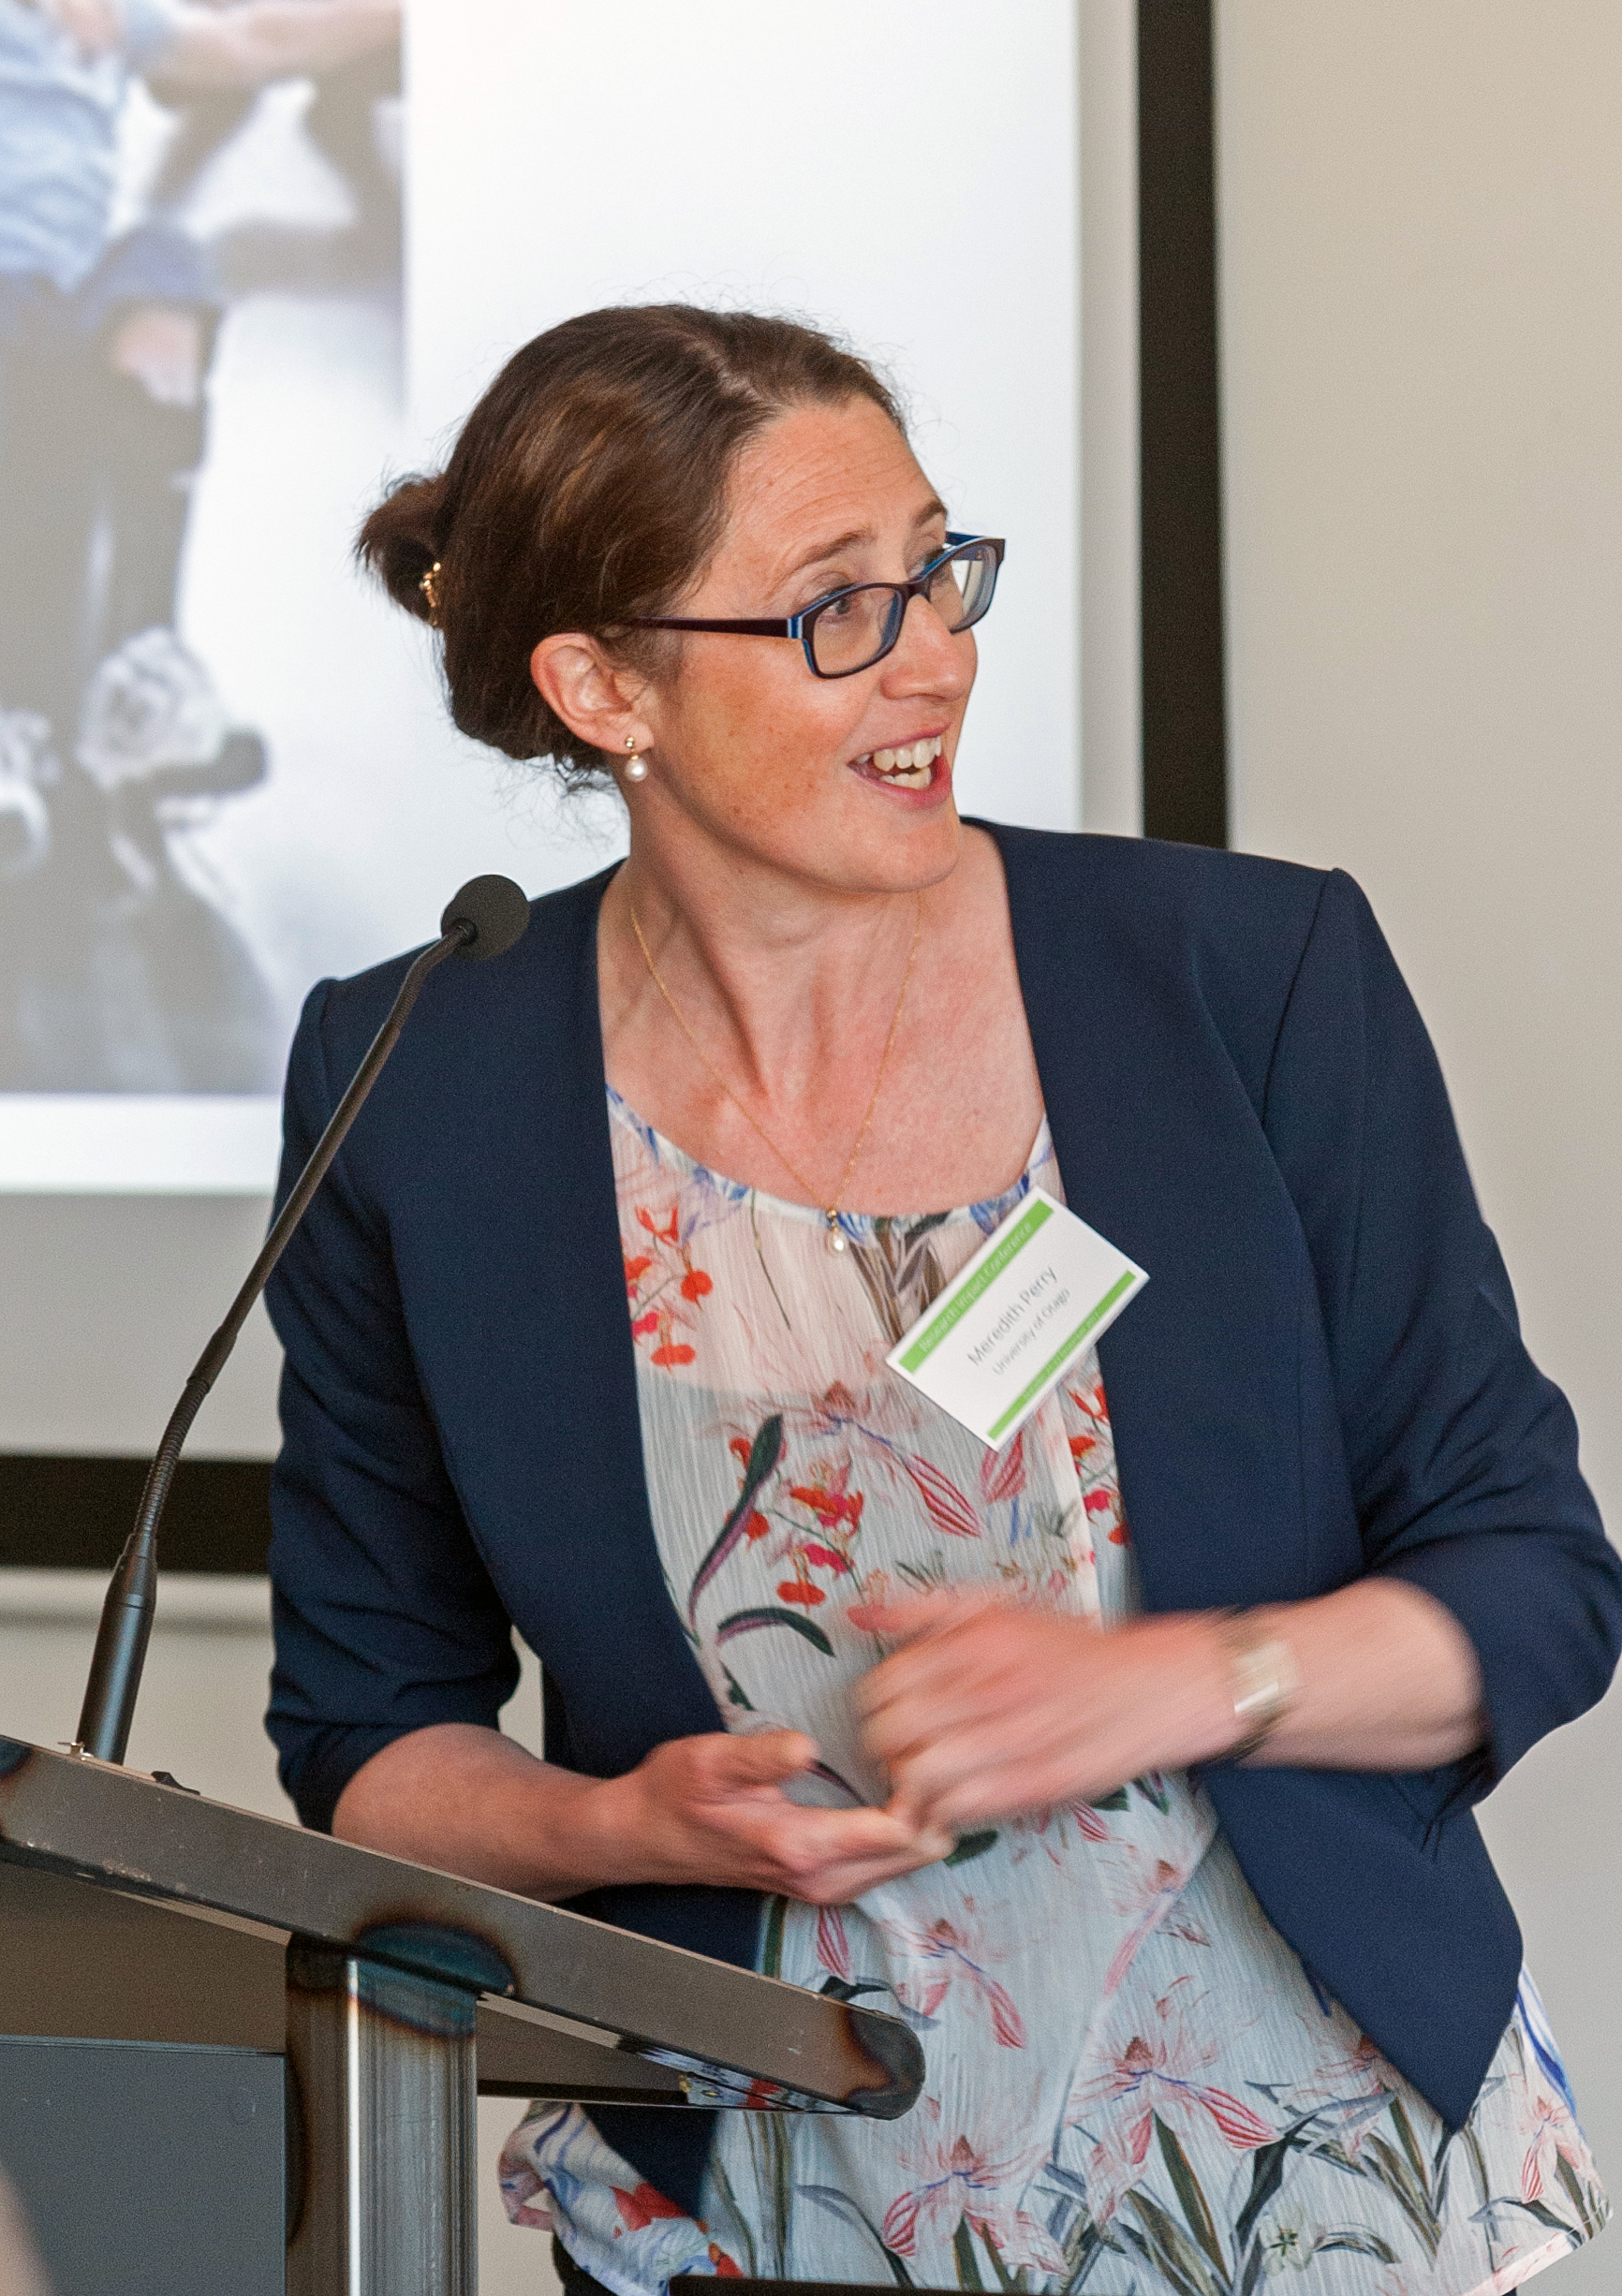 physio_merdith perry at lectern 2018 650